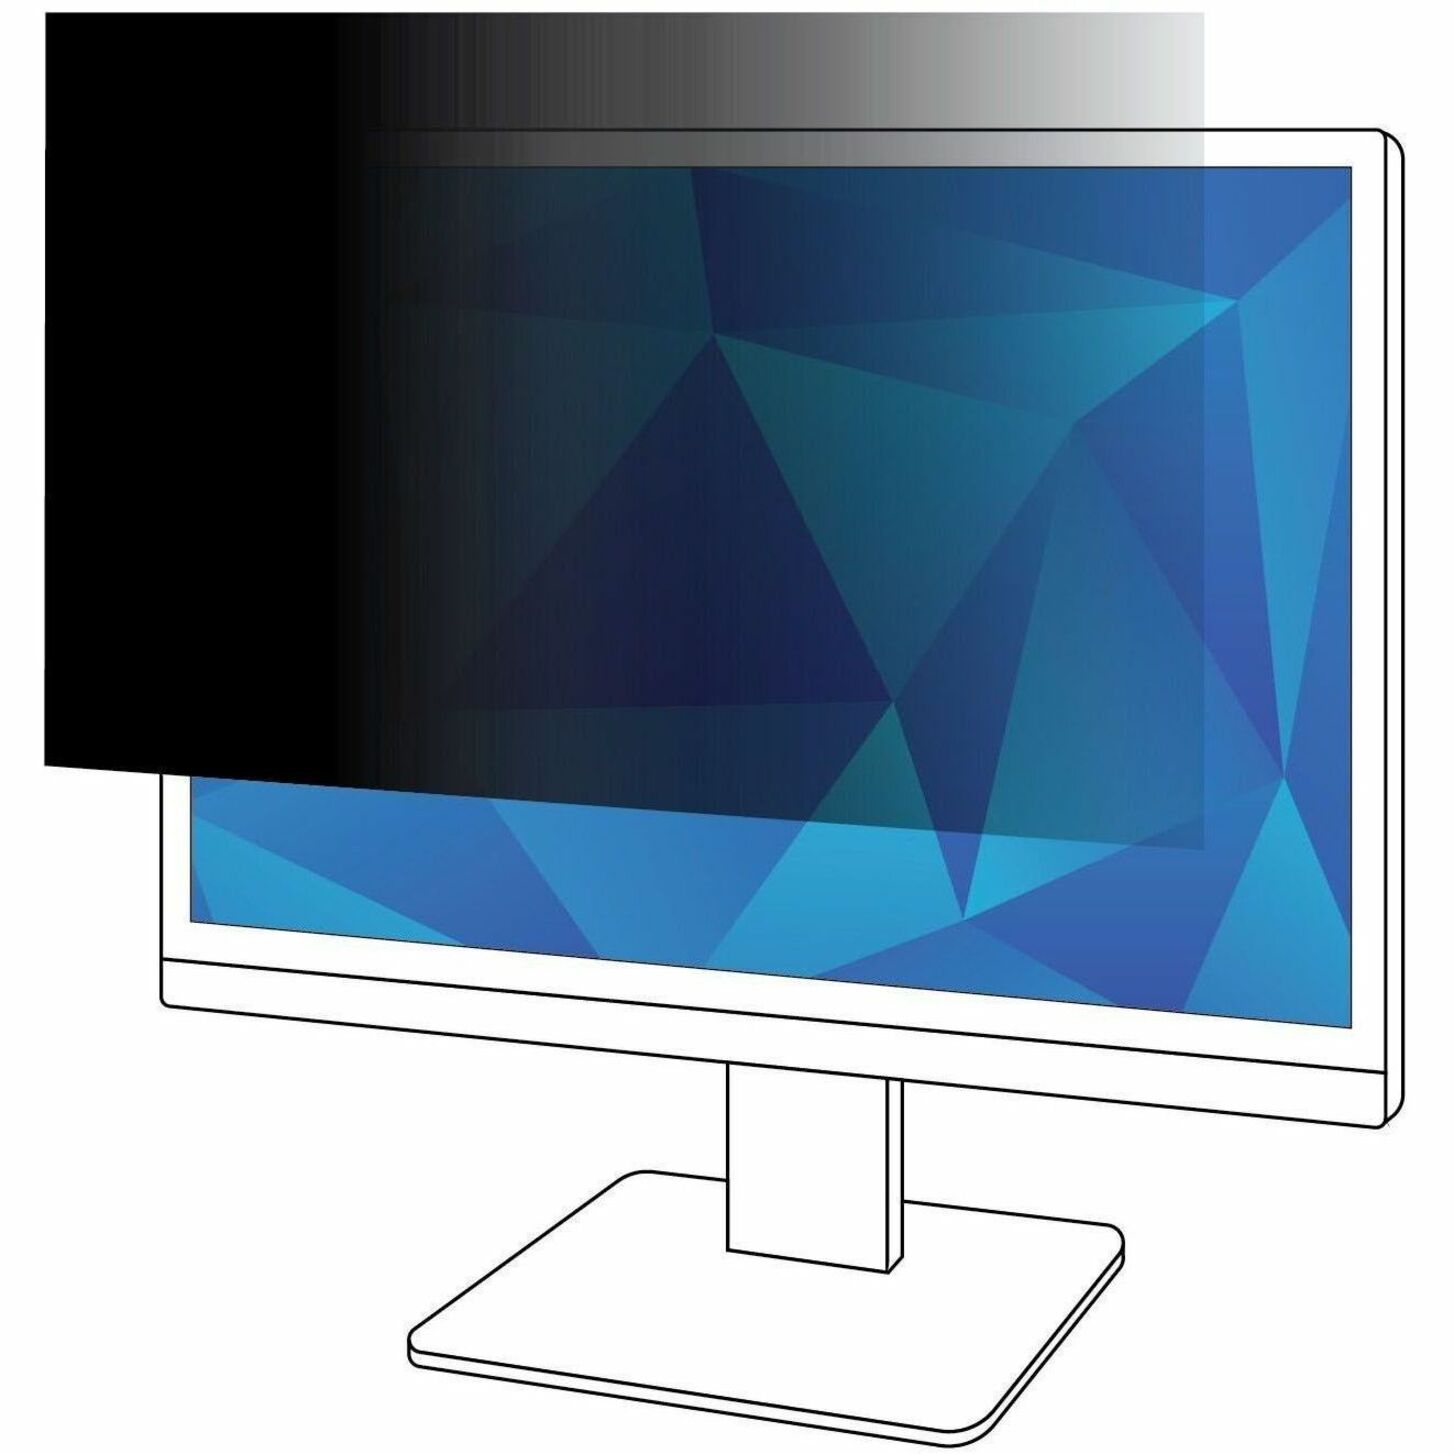 3M PF260W1B Privacy Filter for 26in Monitor, Matte Black, Easy to Apply, Limited Viewing Angle